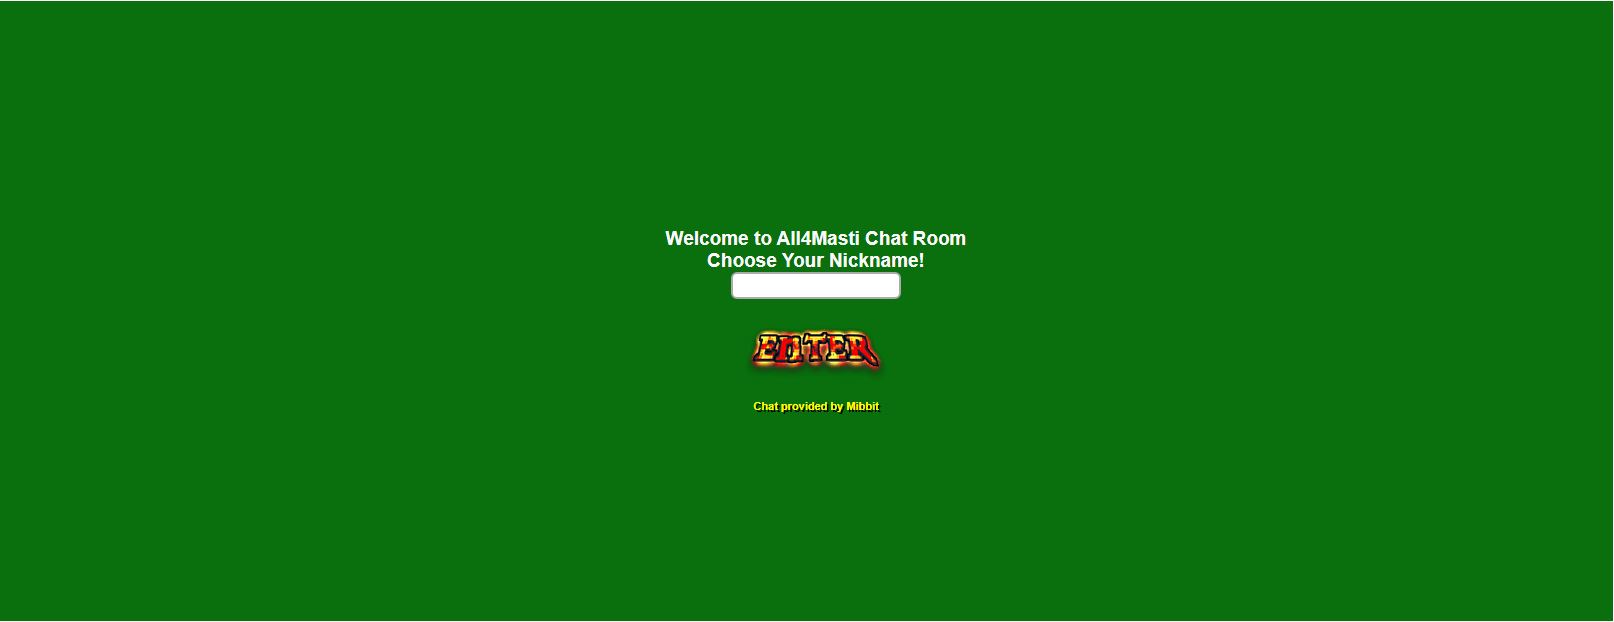 Online chat room